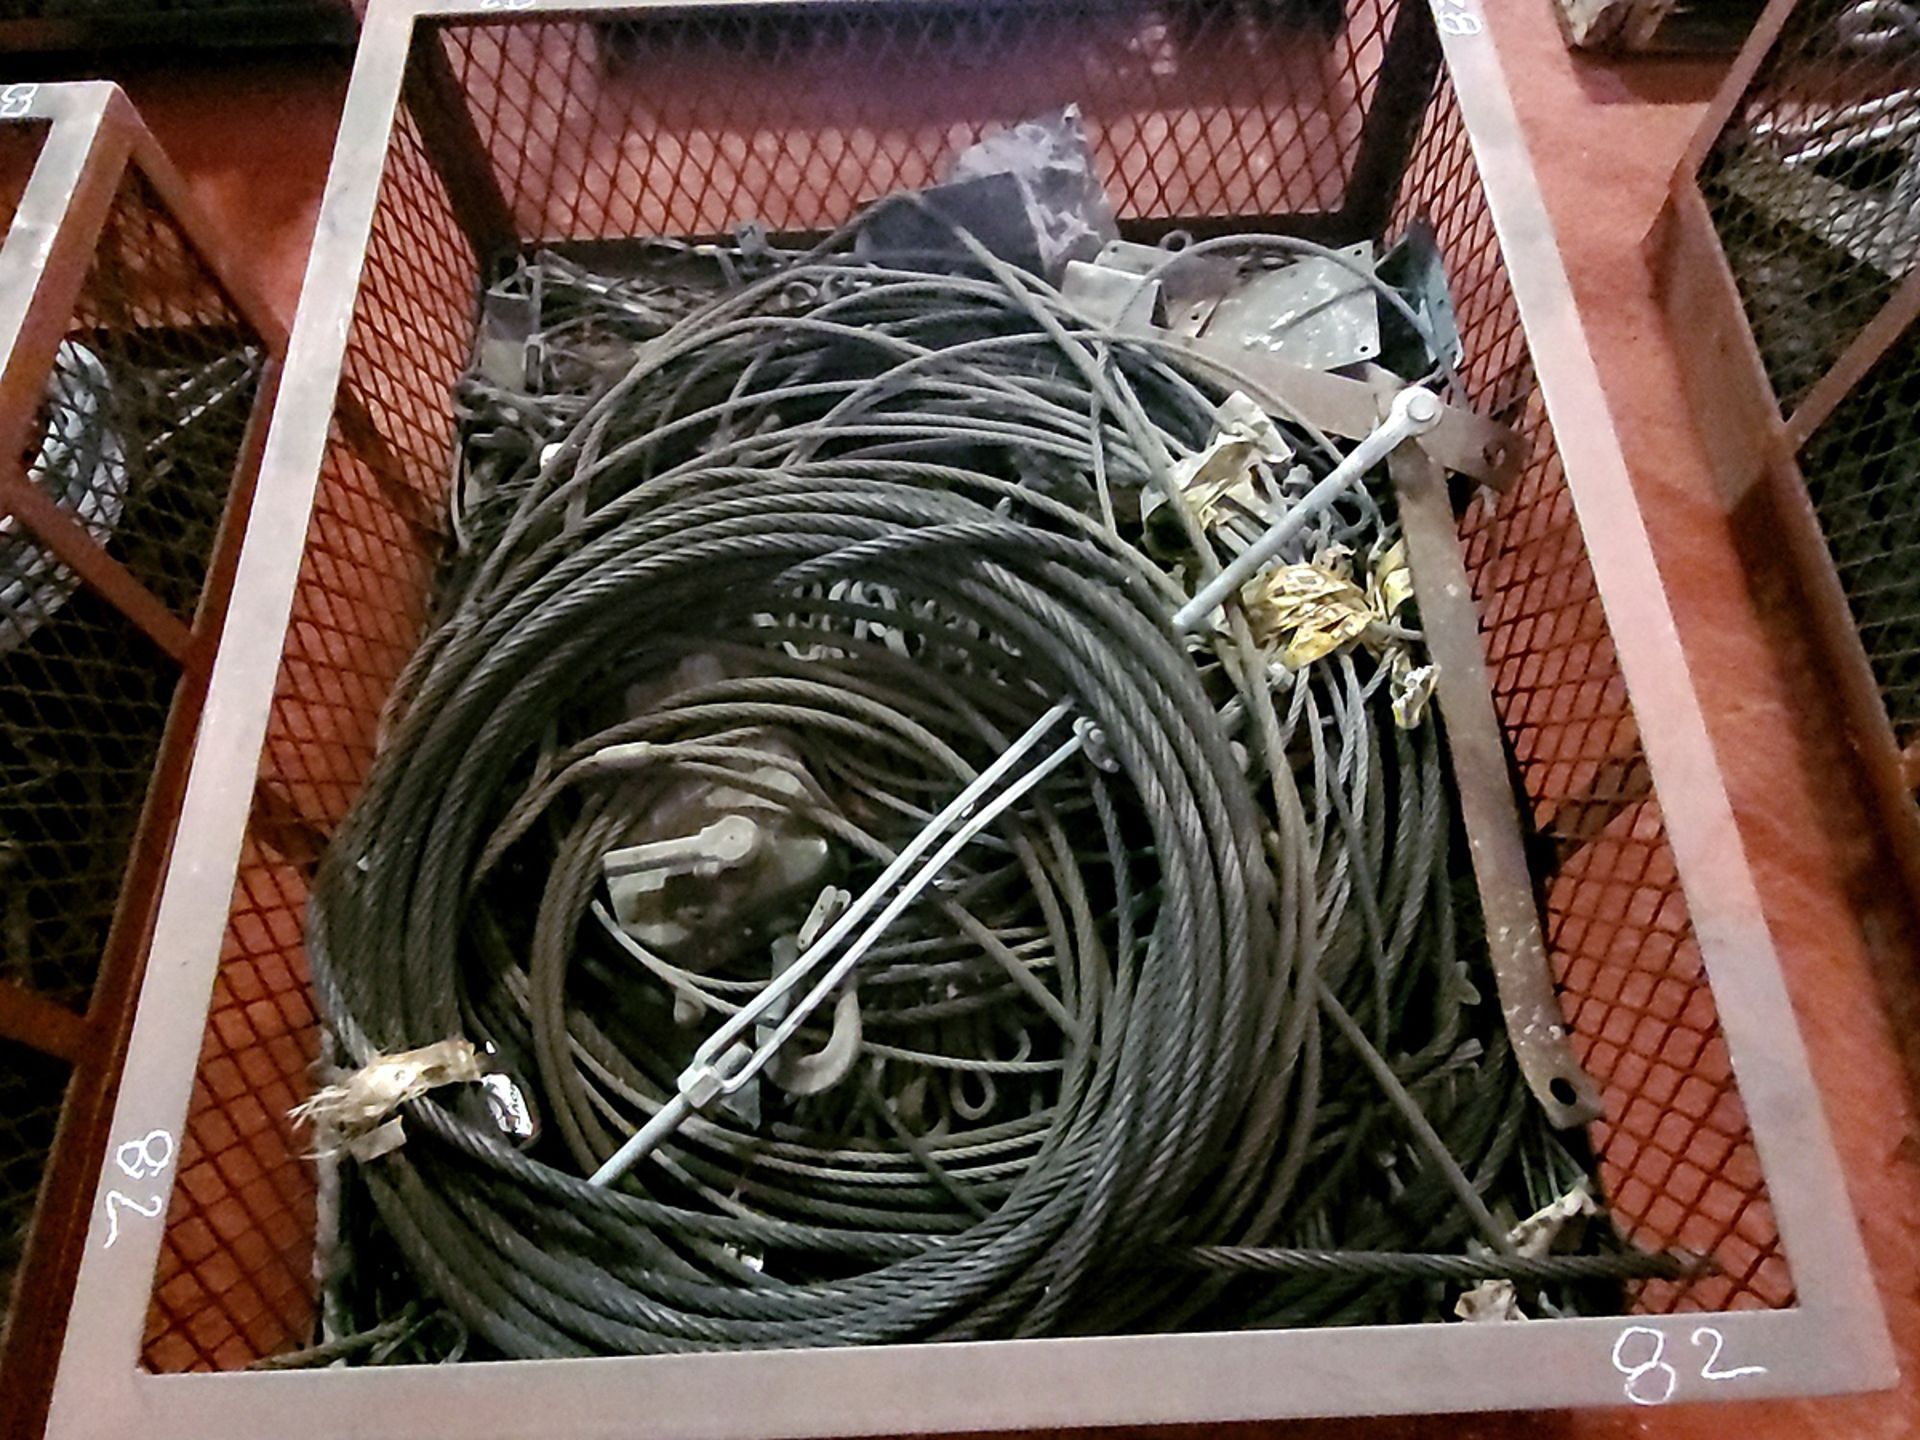 A Group of Ass't Braided Cable and Tensioners With Steel Bin